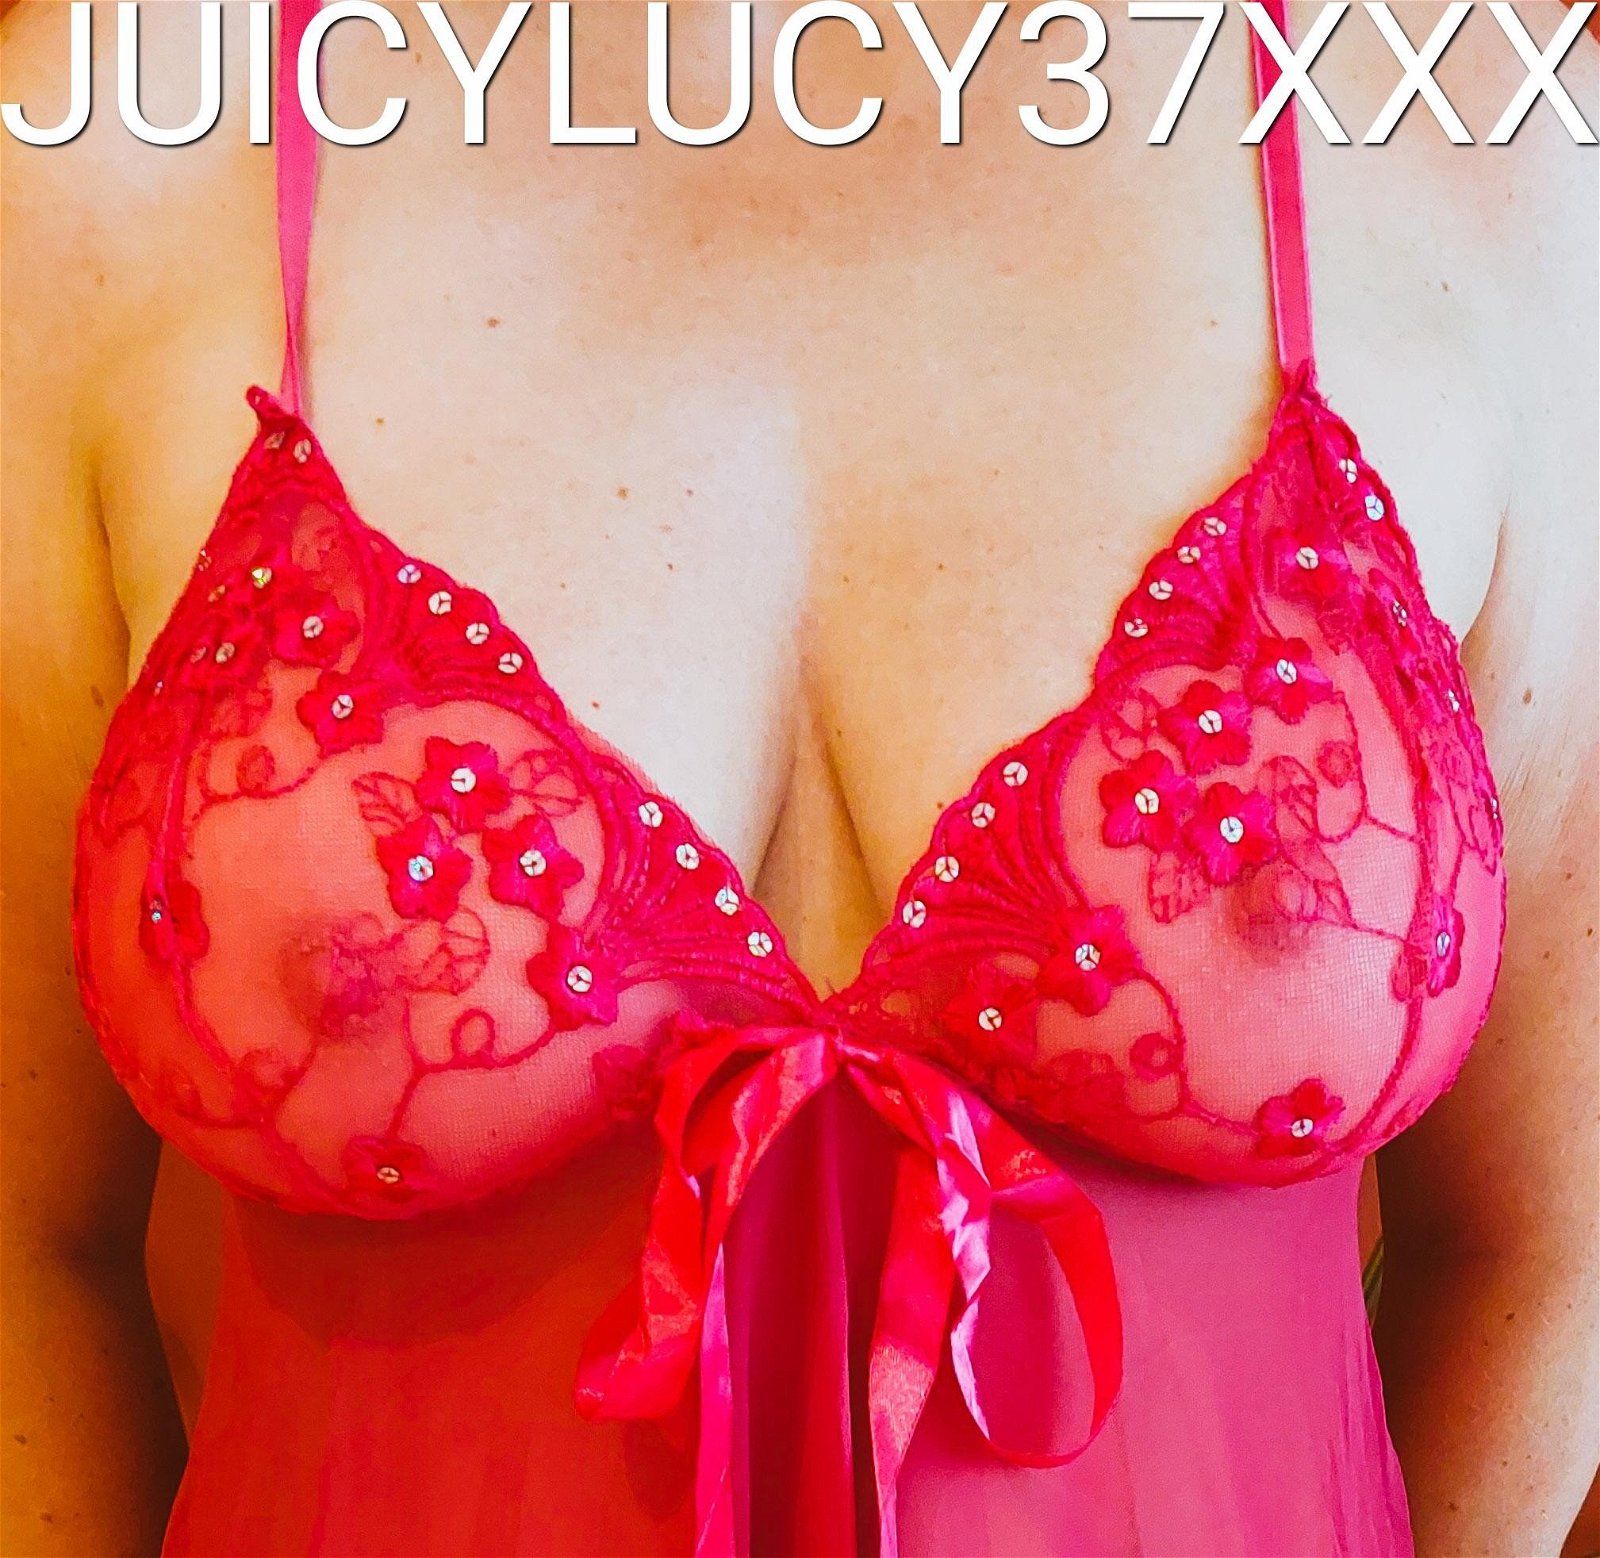 Photo by Juicylucy38xxx with the username @Juicylucy38xxx, who is a verified user,  April 1, 2023 at 10:22 AM. The post is about the topic JuicyLucy38xxx and the text says 'Morning Sharesome friends. Hope you're all looking forward to the weekend....?
Well im up and ready for it....Have fun all 🥂

#Juicylucy38xxx #milf #mombod
#bigtits #pussy #ass #lingerie'